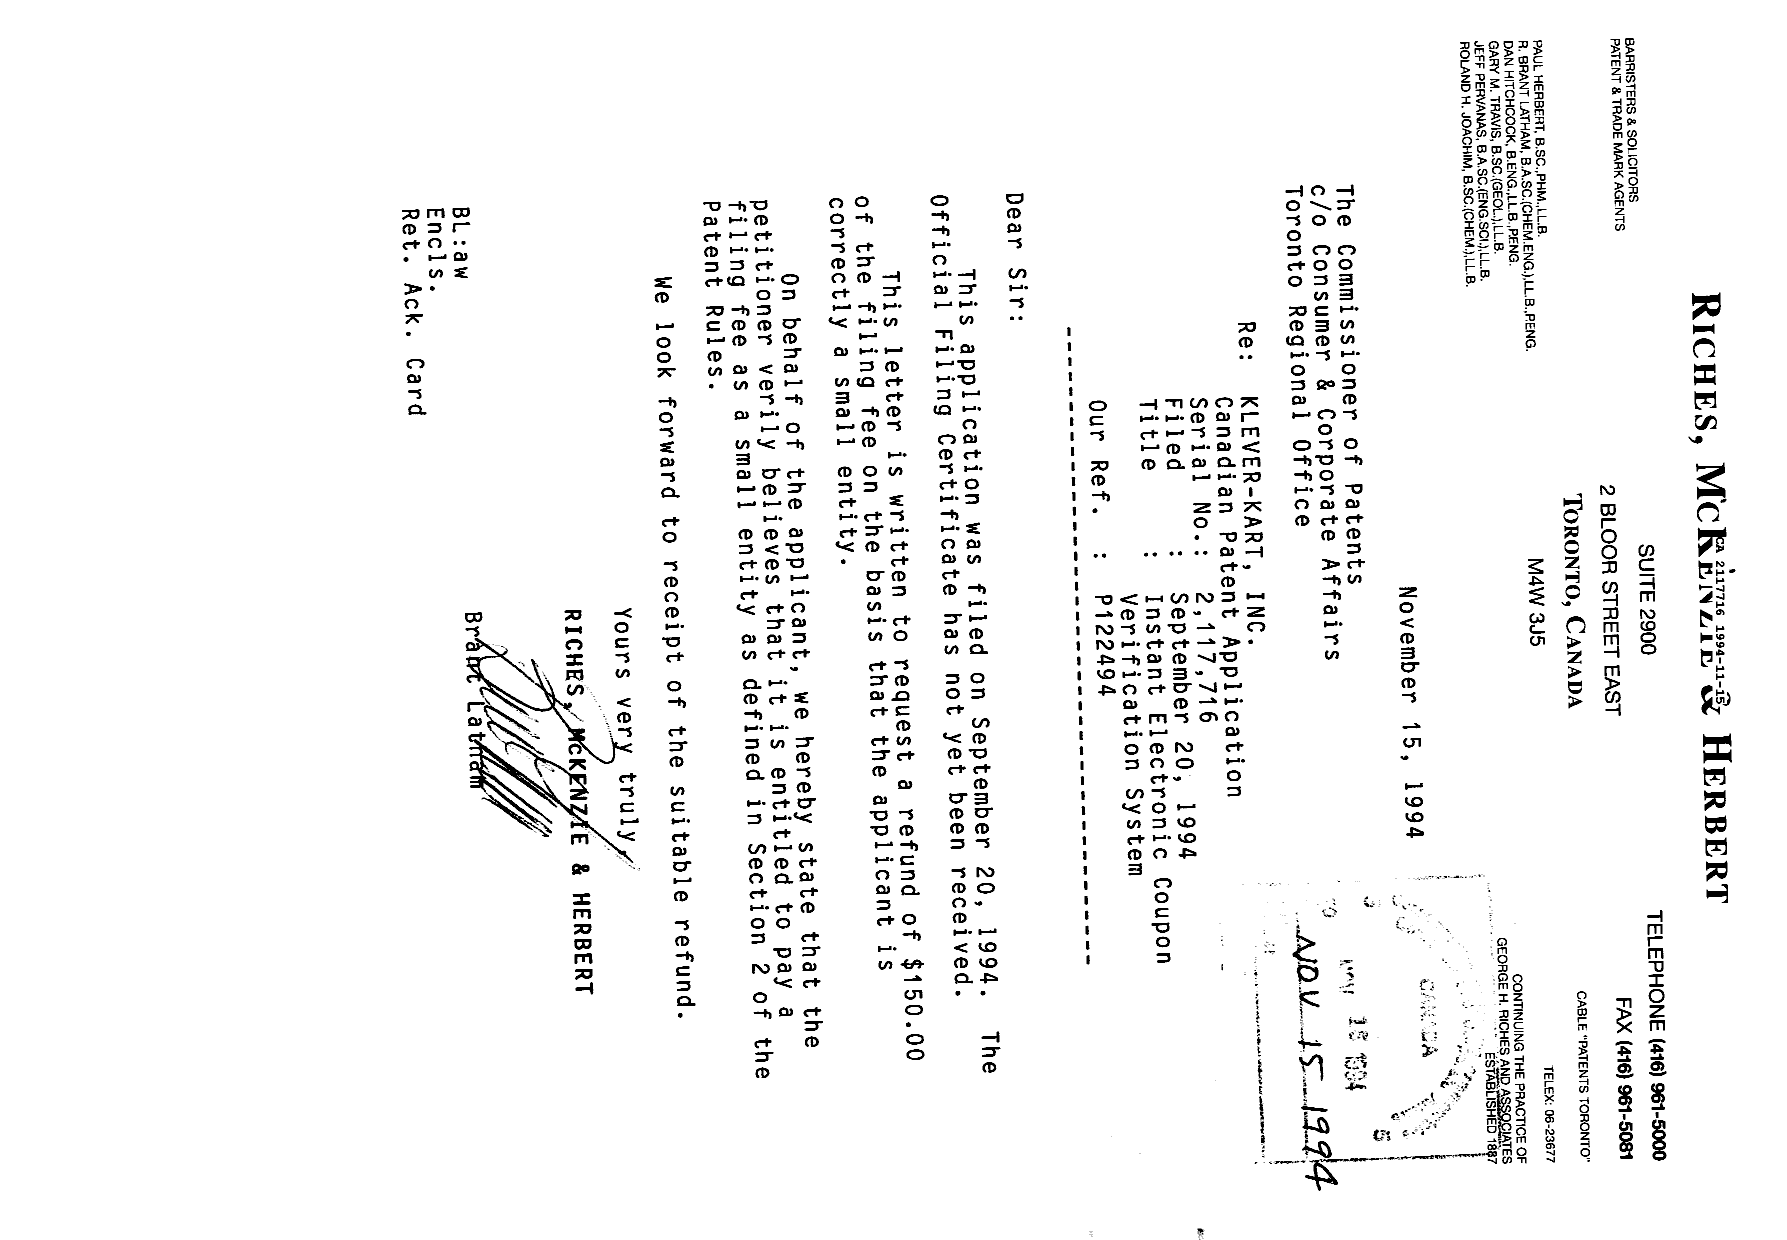 Canadian Patent Document 2117716. PCT Correspondence 19941115. Image 1 of 1